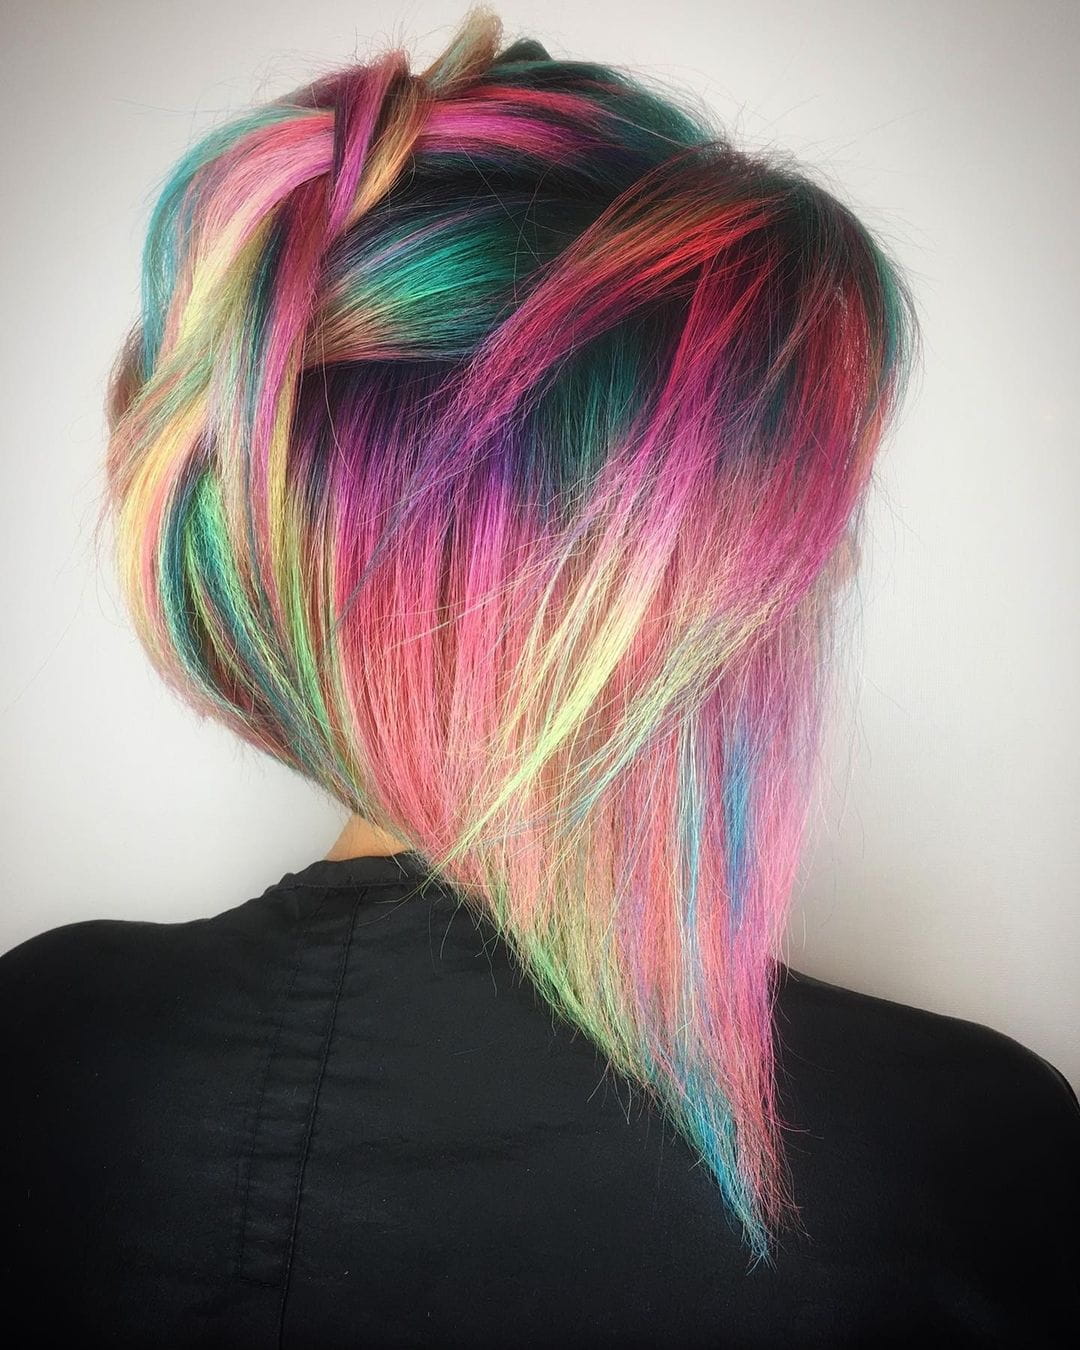 100+ Best Colorful Hair Ideas images 66